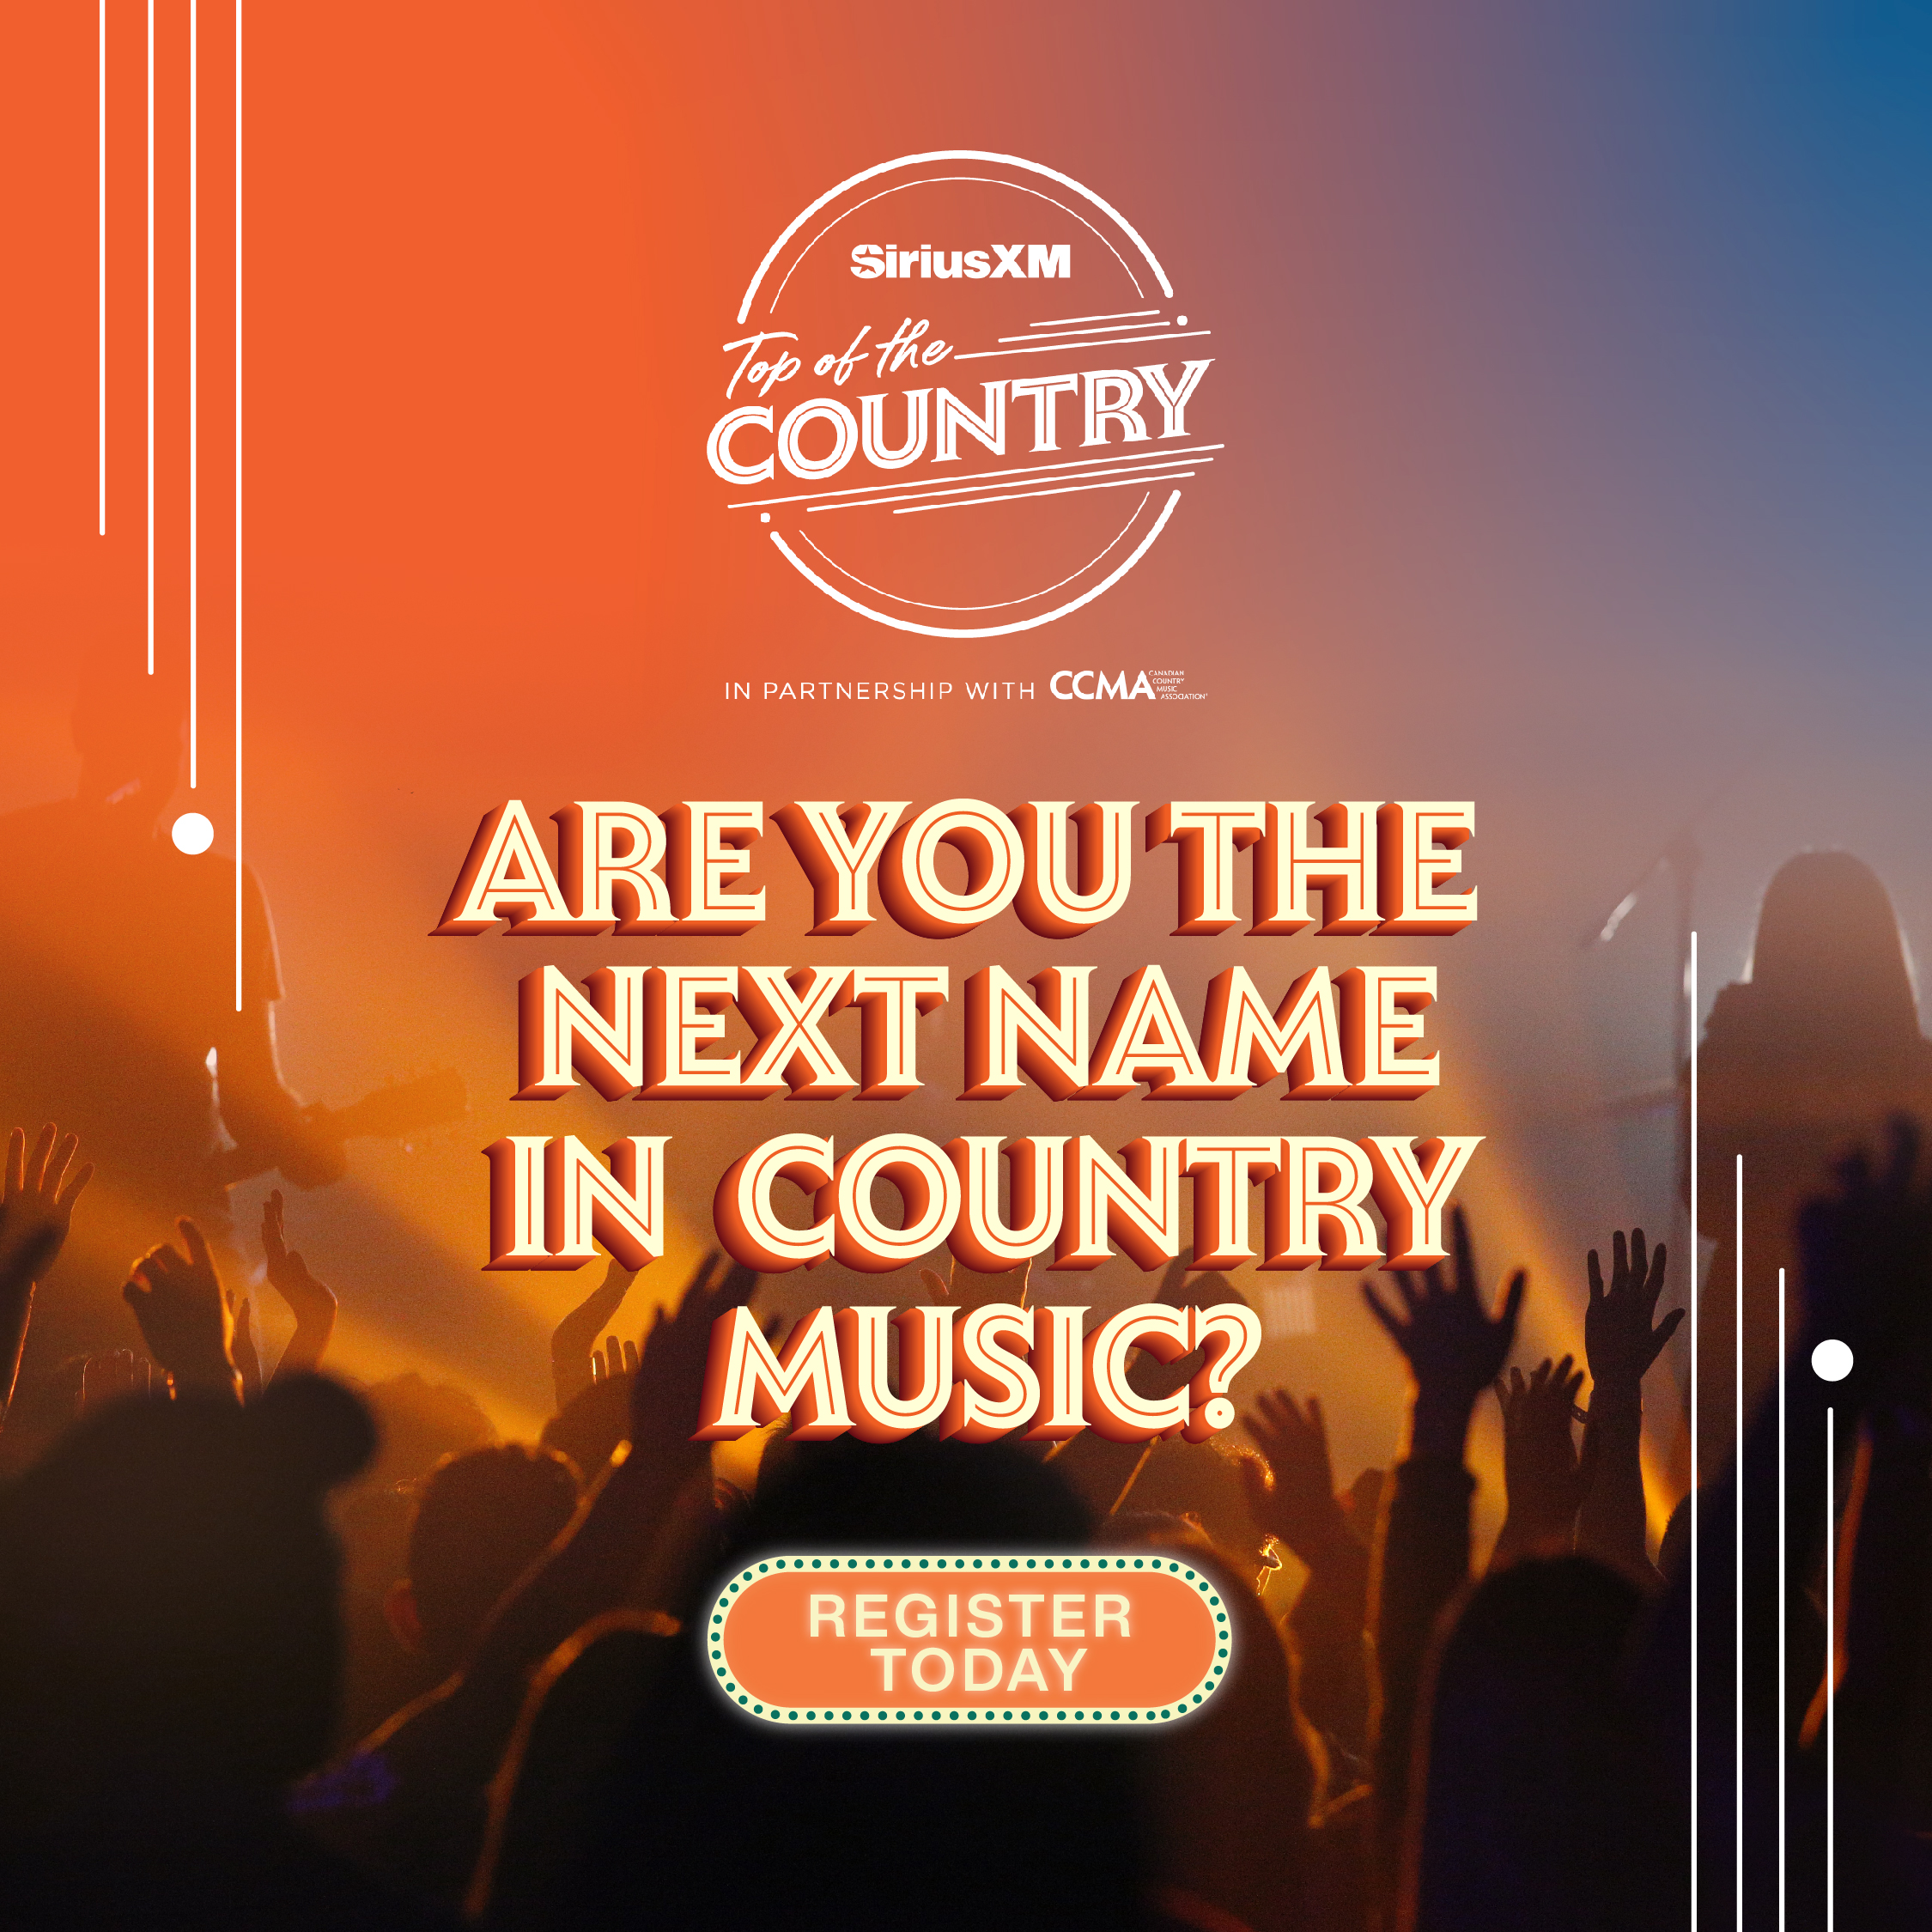 SiriusXM’s Top of the Country Registration is Now Open!